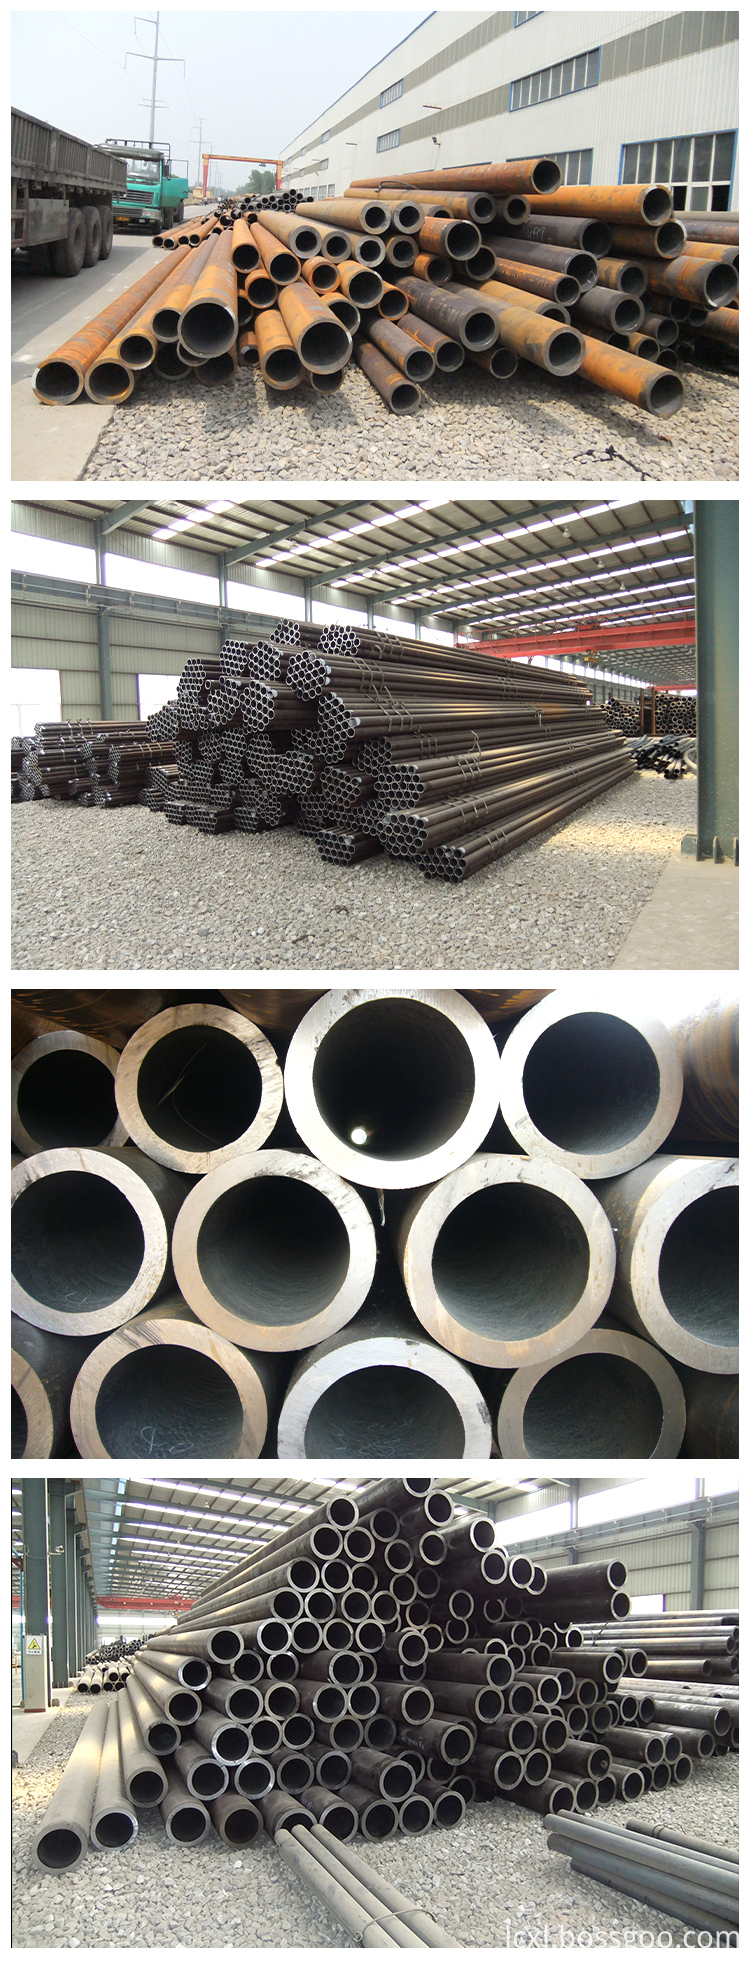 Sae1020 Pipe Steel 32x1